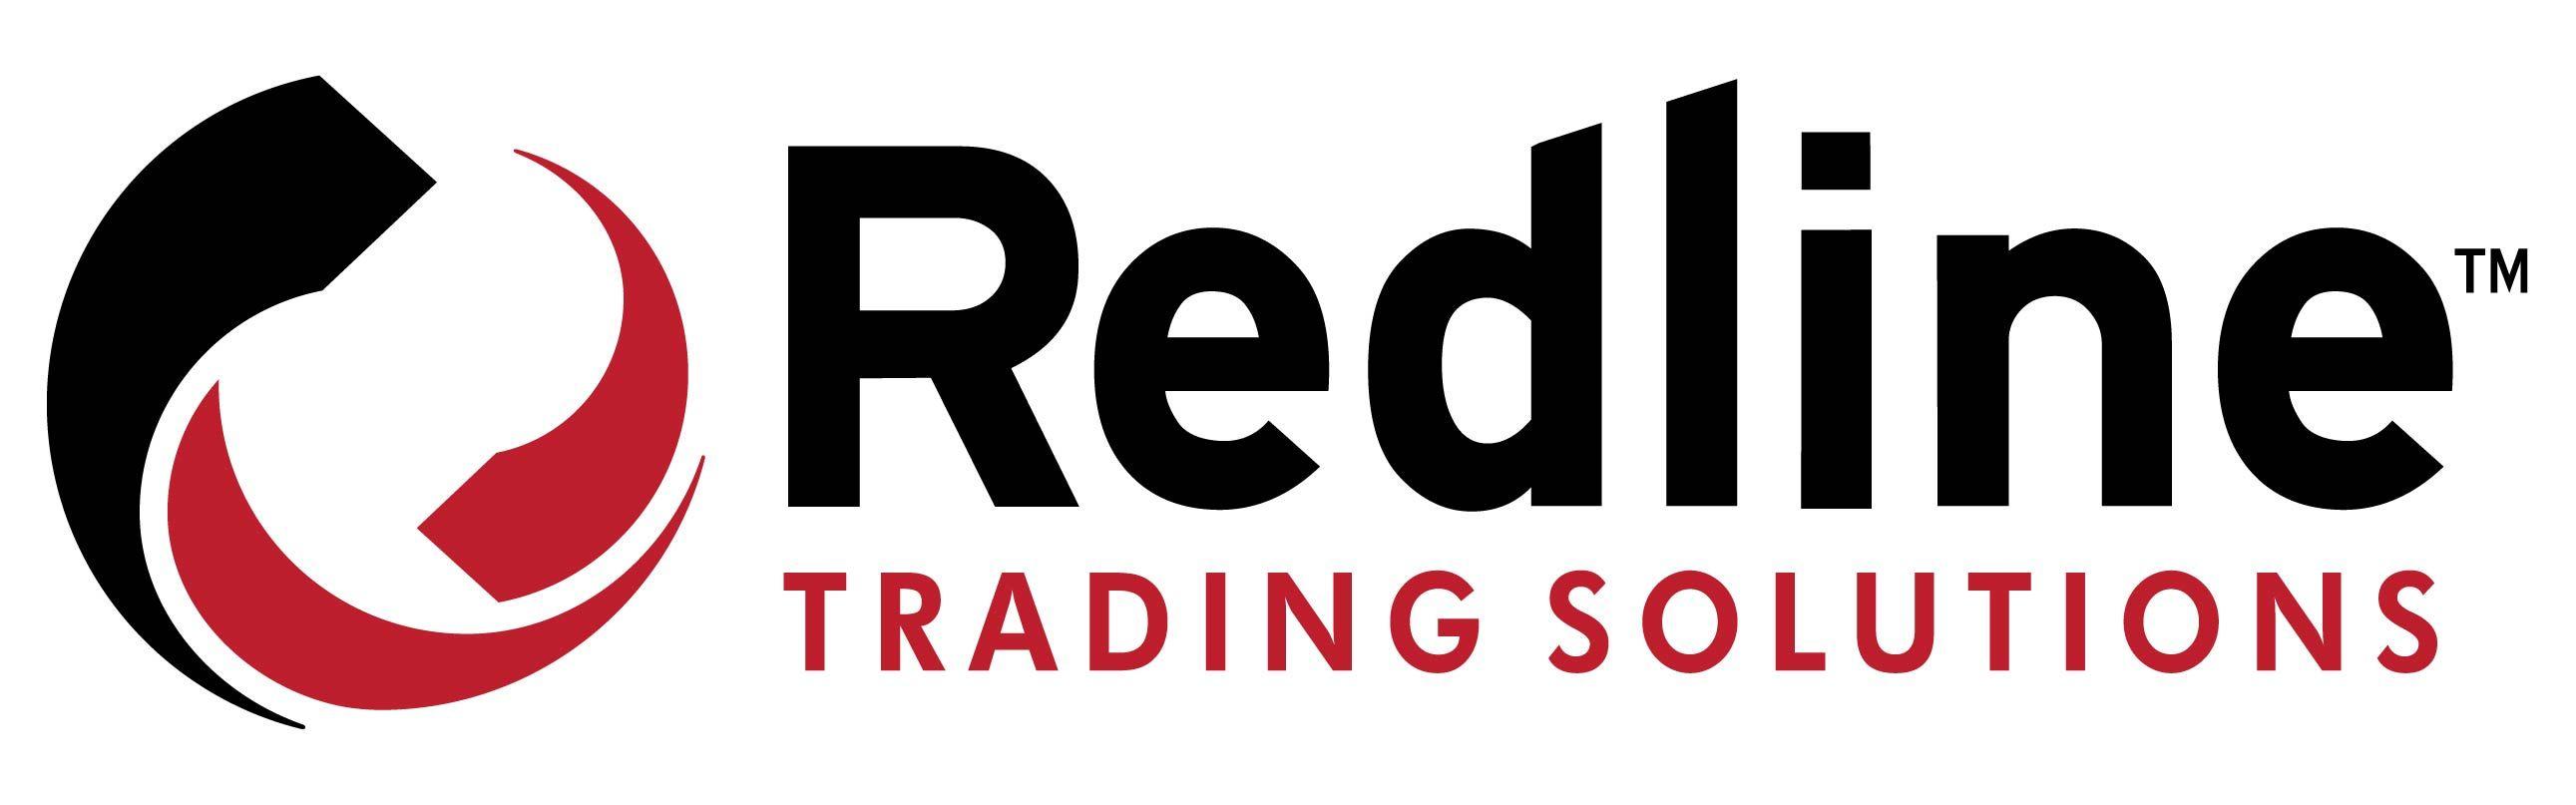 Red Line Logo - Redline Trading Solutions | Leader in Low Latency Market Data and ...